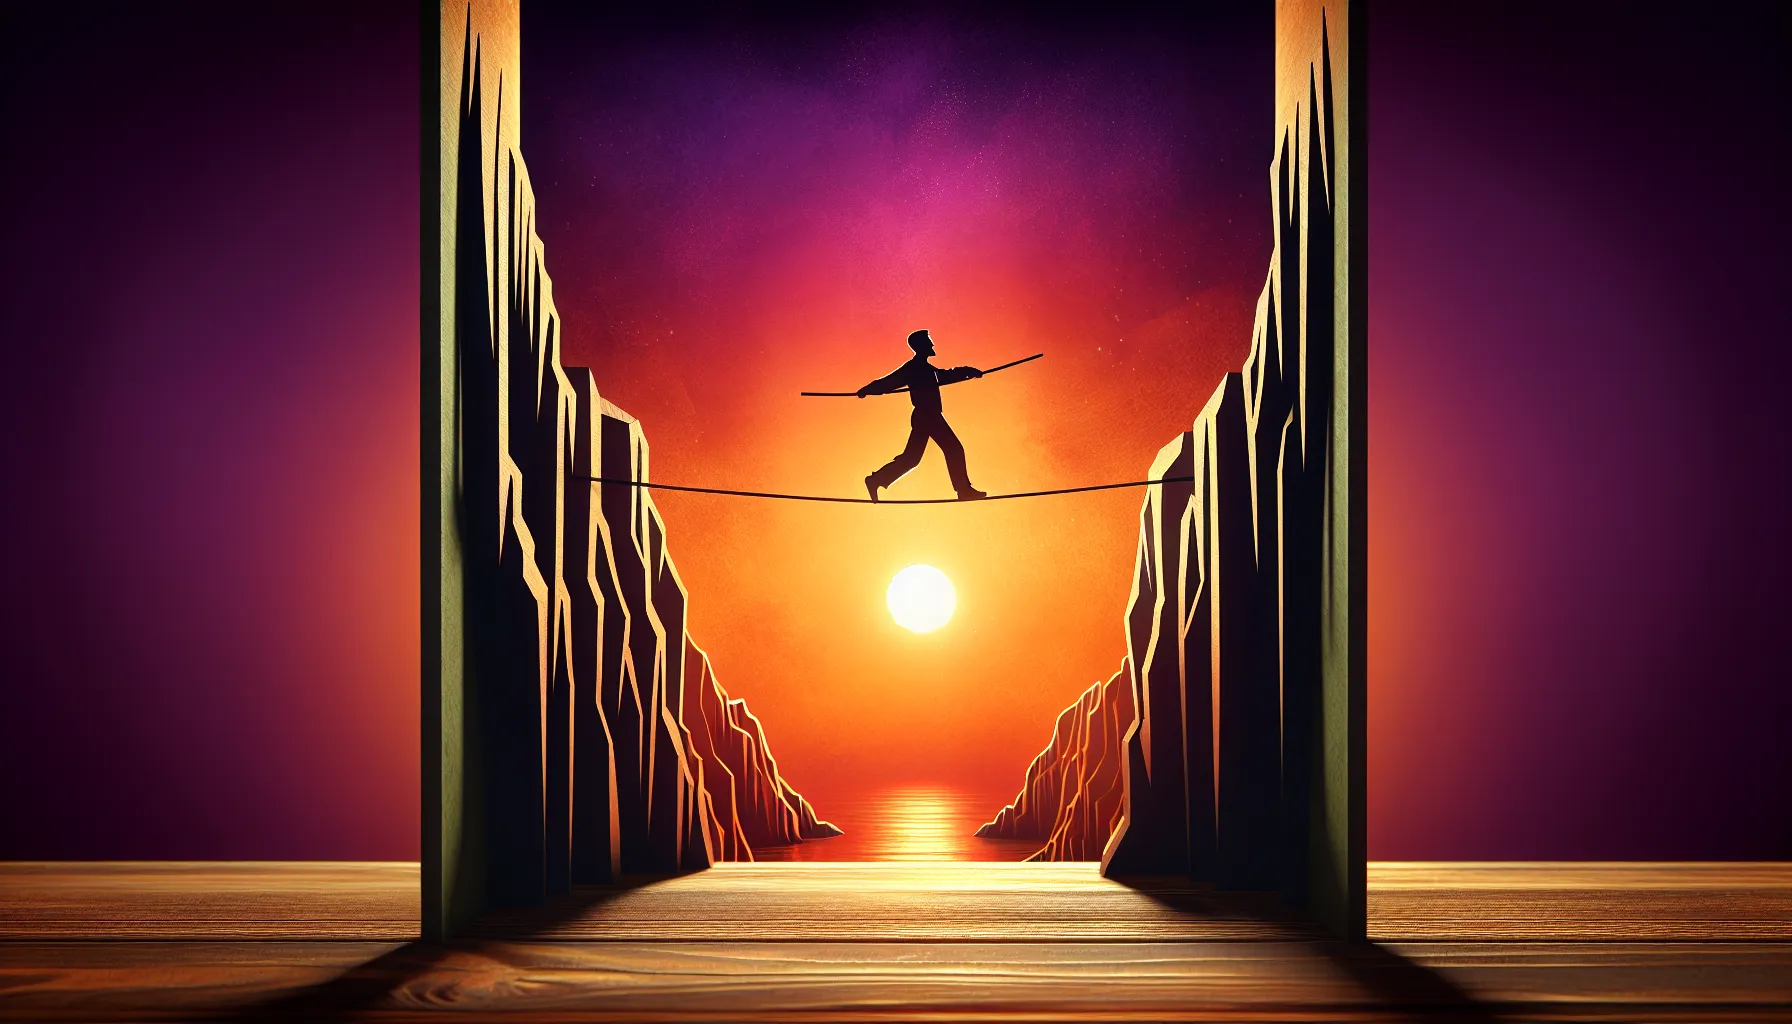 Like a tightrope walker suspended in a golden sunset, men too must navigate the fine line between the pursuit of independence and the embrace of commitment, each step a testament to their strength and vulnerability.